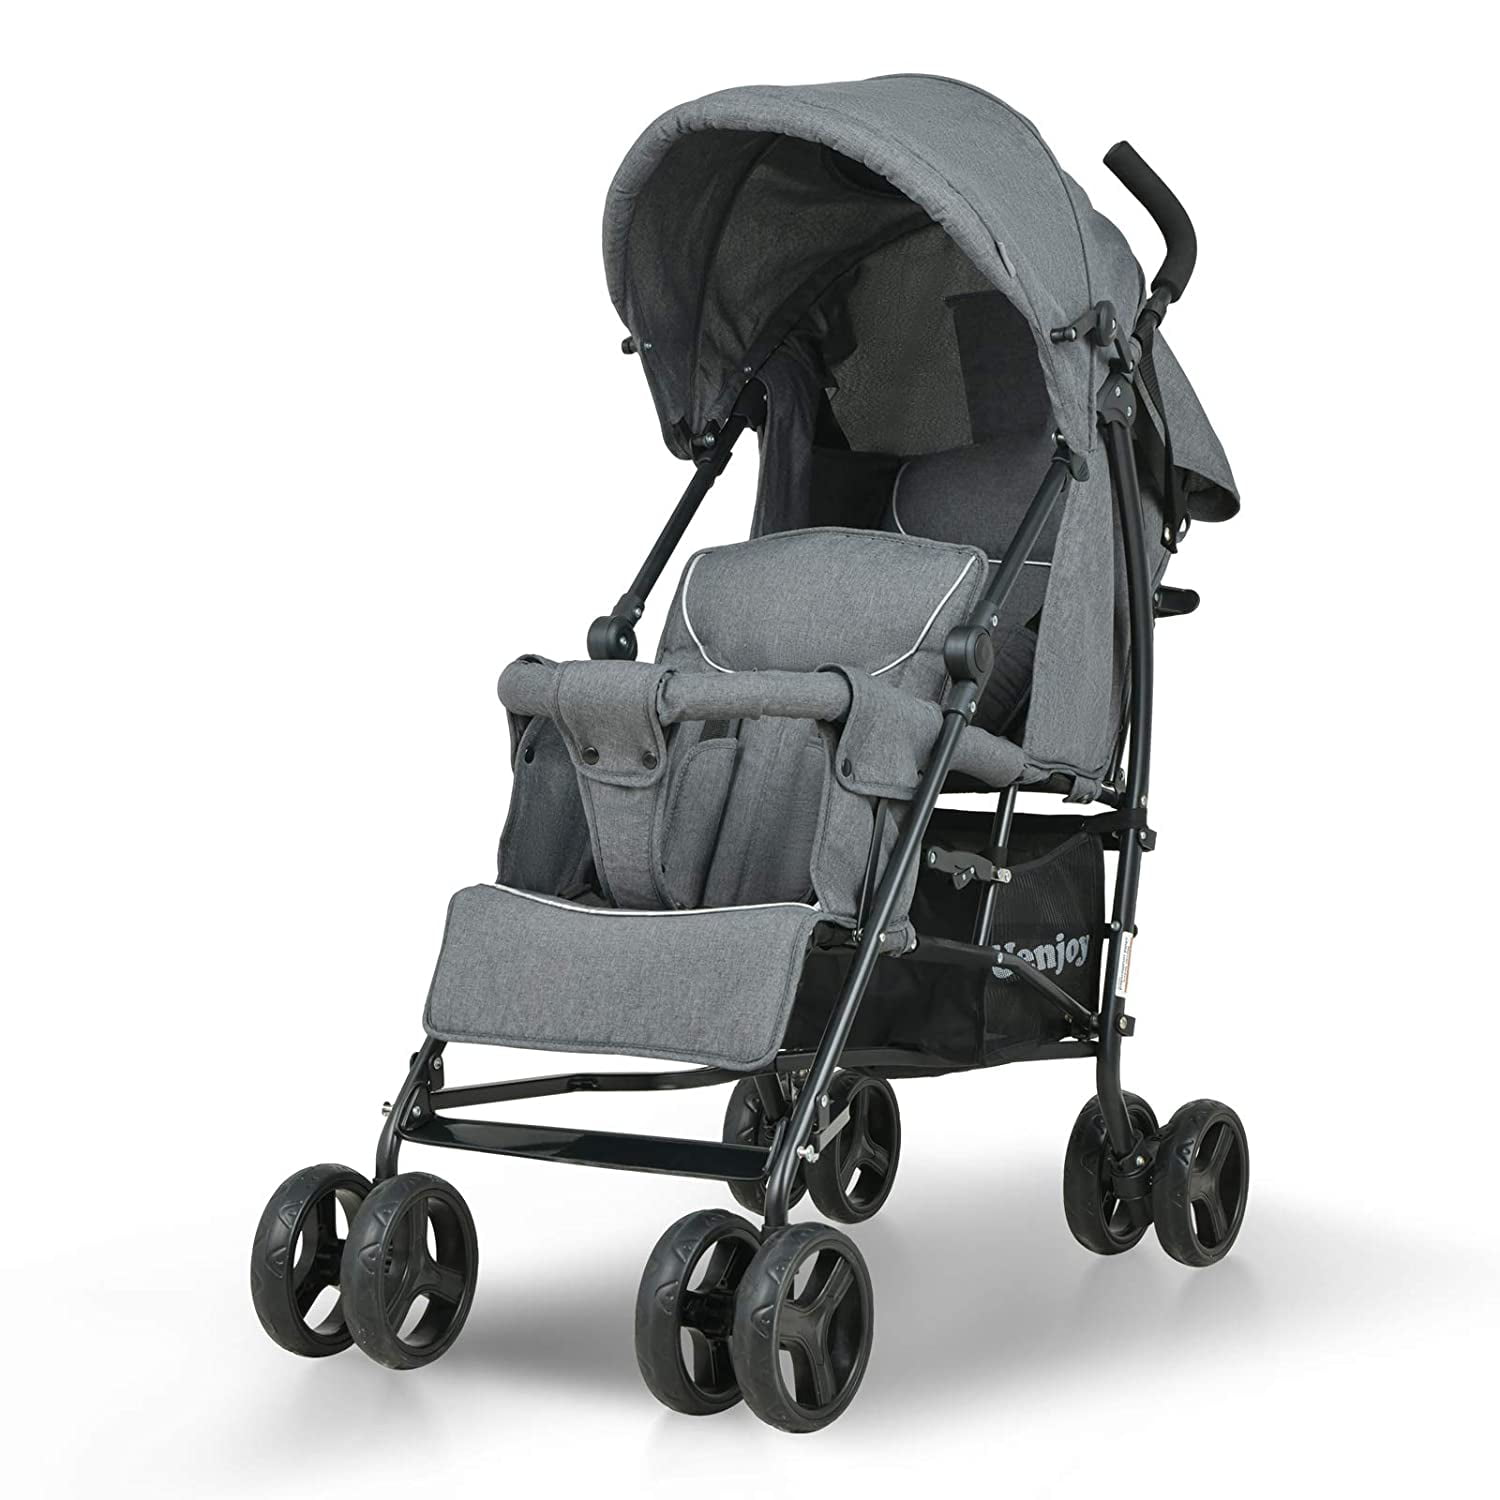 Crown Child Stroller Buggy Dual Way 2 Directions Mobile Sport 6 Wheel 360°